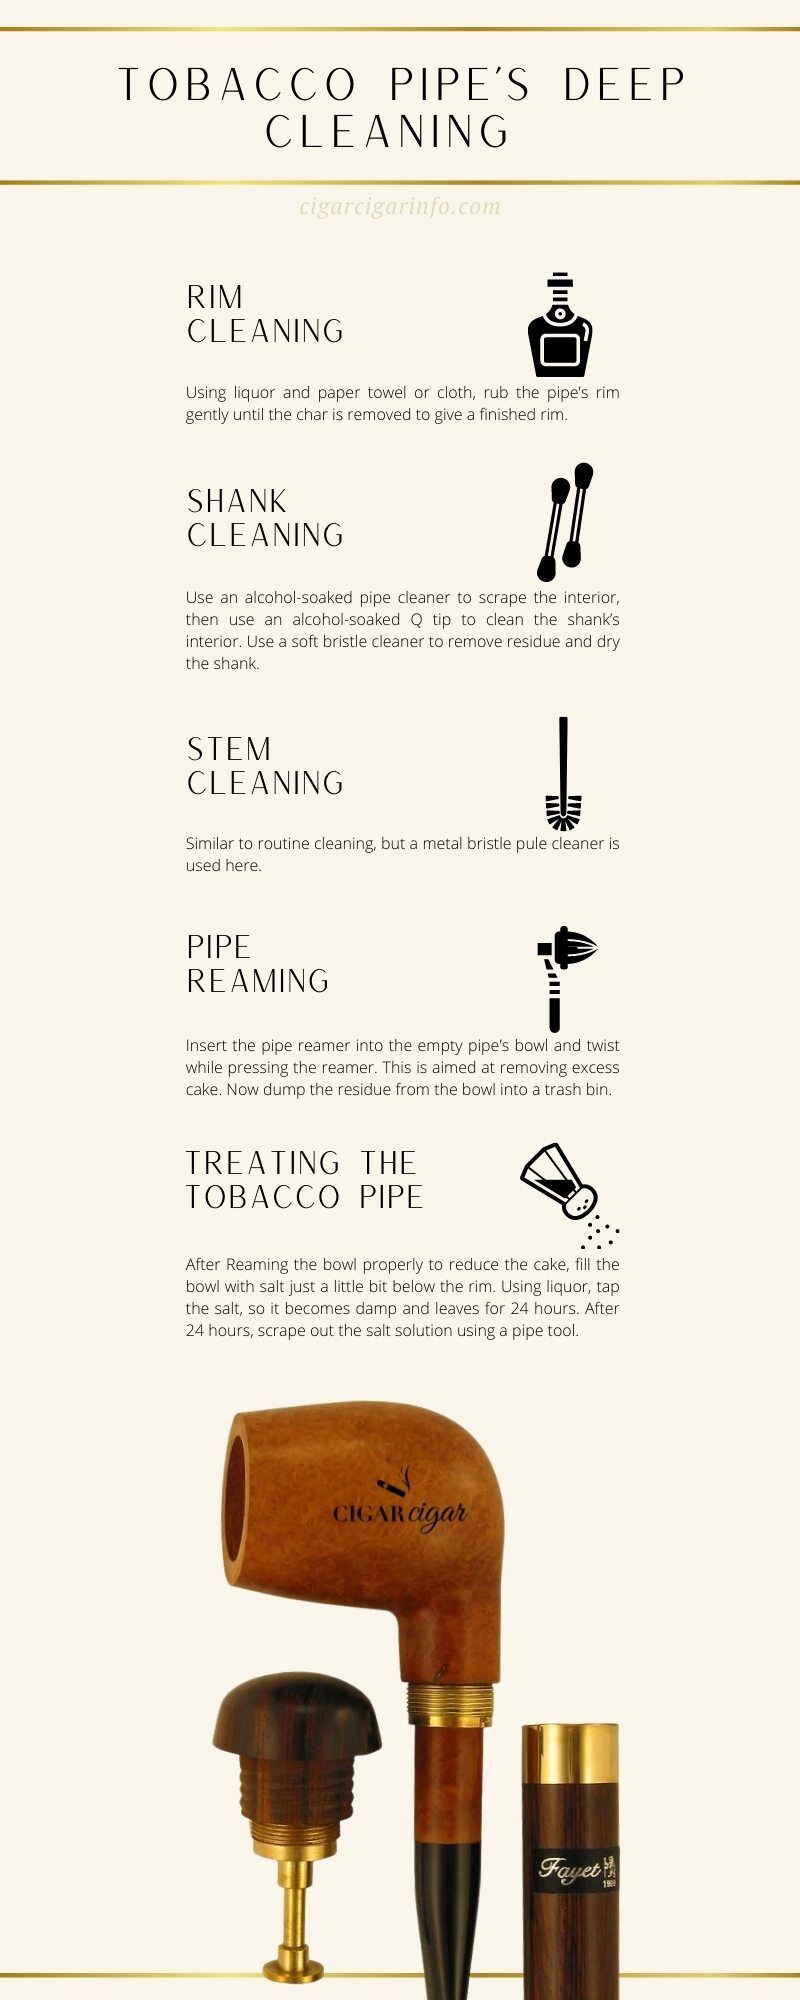 How To Properly Clean A Tobacco Pipe: Daily, Routine & Deep